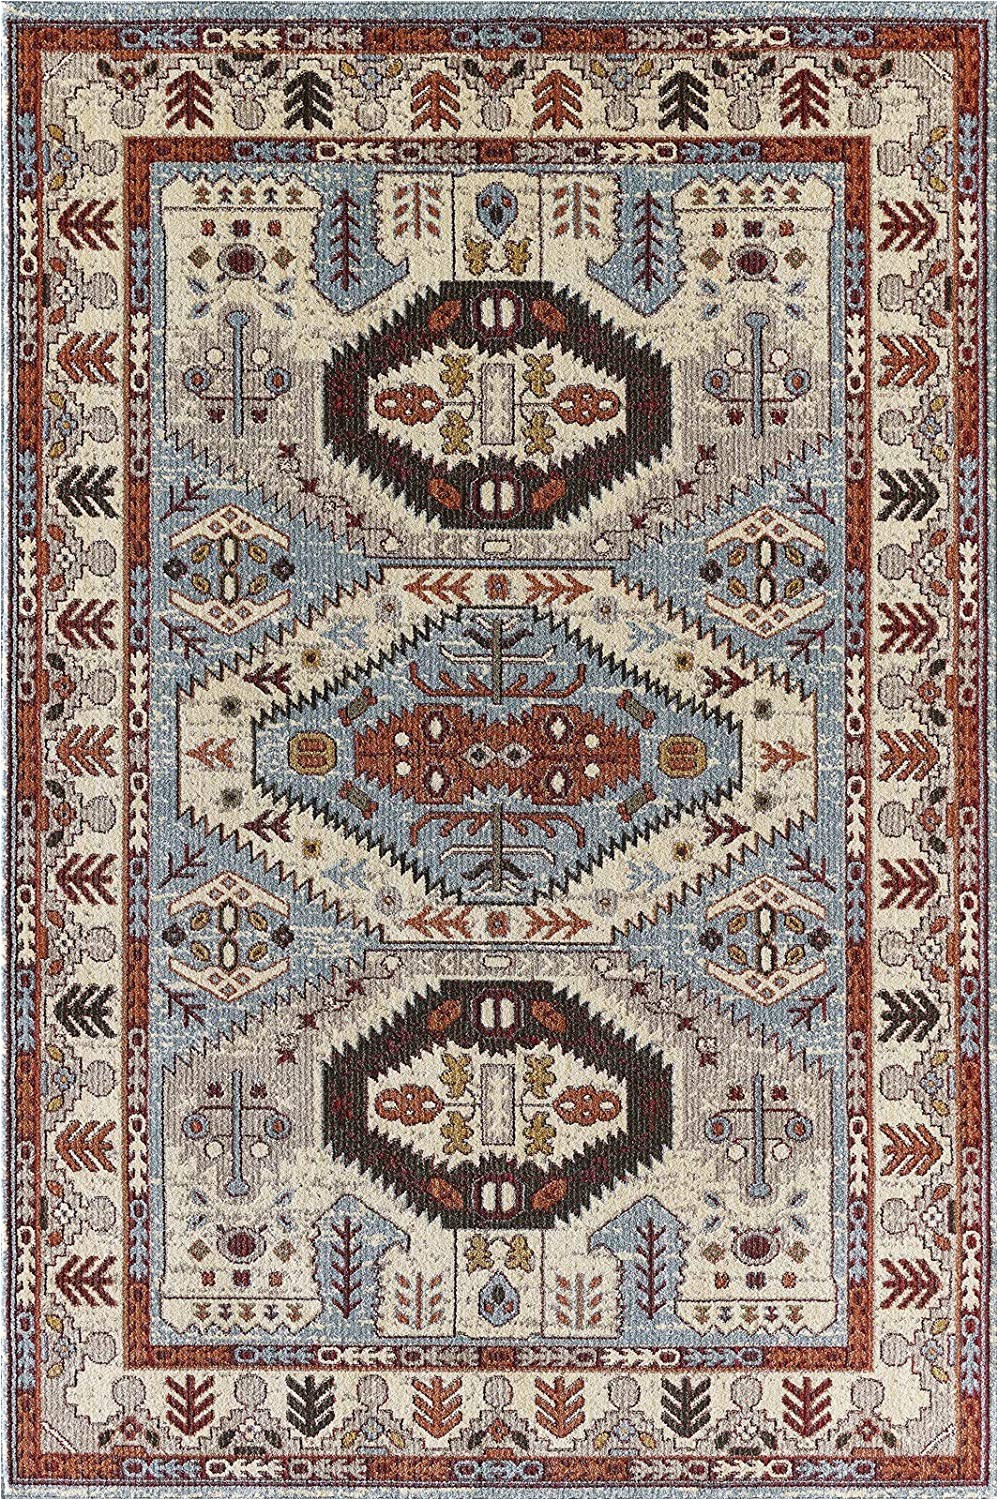 8×10 area Rugs Dining Room Glory Rugs area Rug Tribal Marisela Vintage south West Carpet Traditional Texture for Bedroom Living Dining Room 7316 Gabbeh Collection 8×10